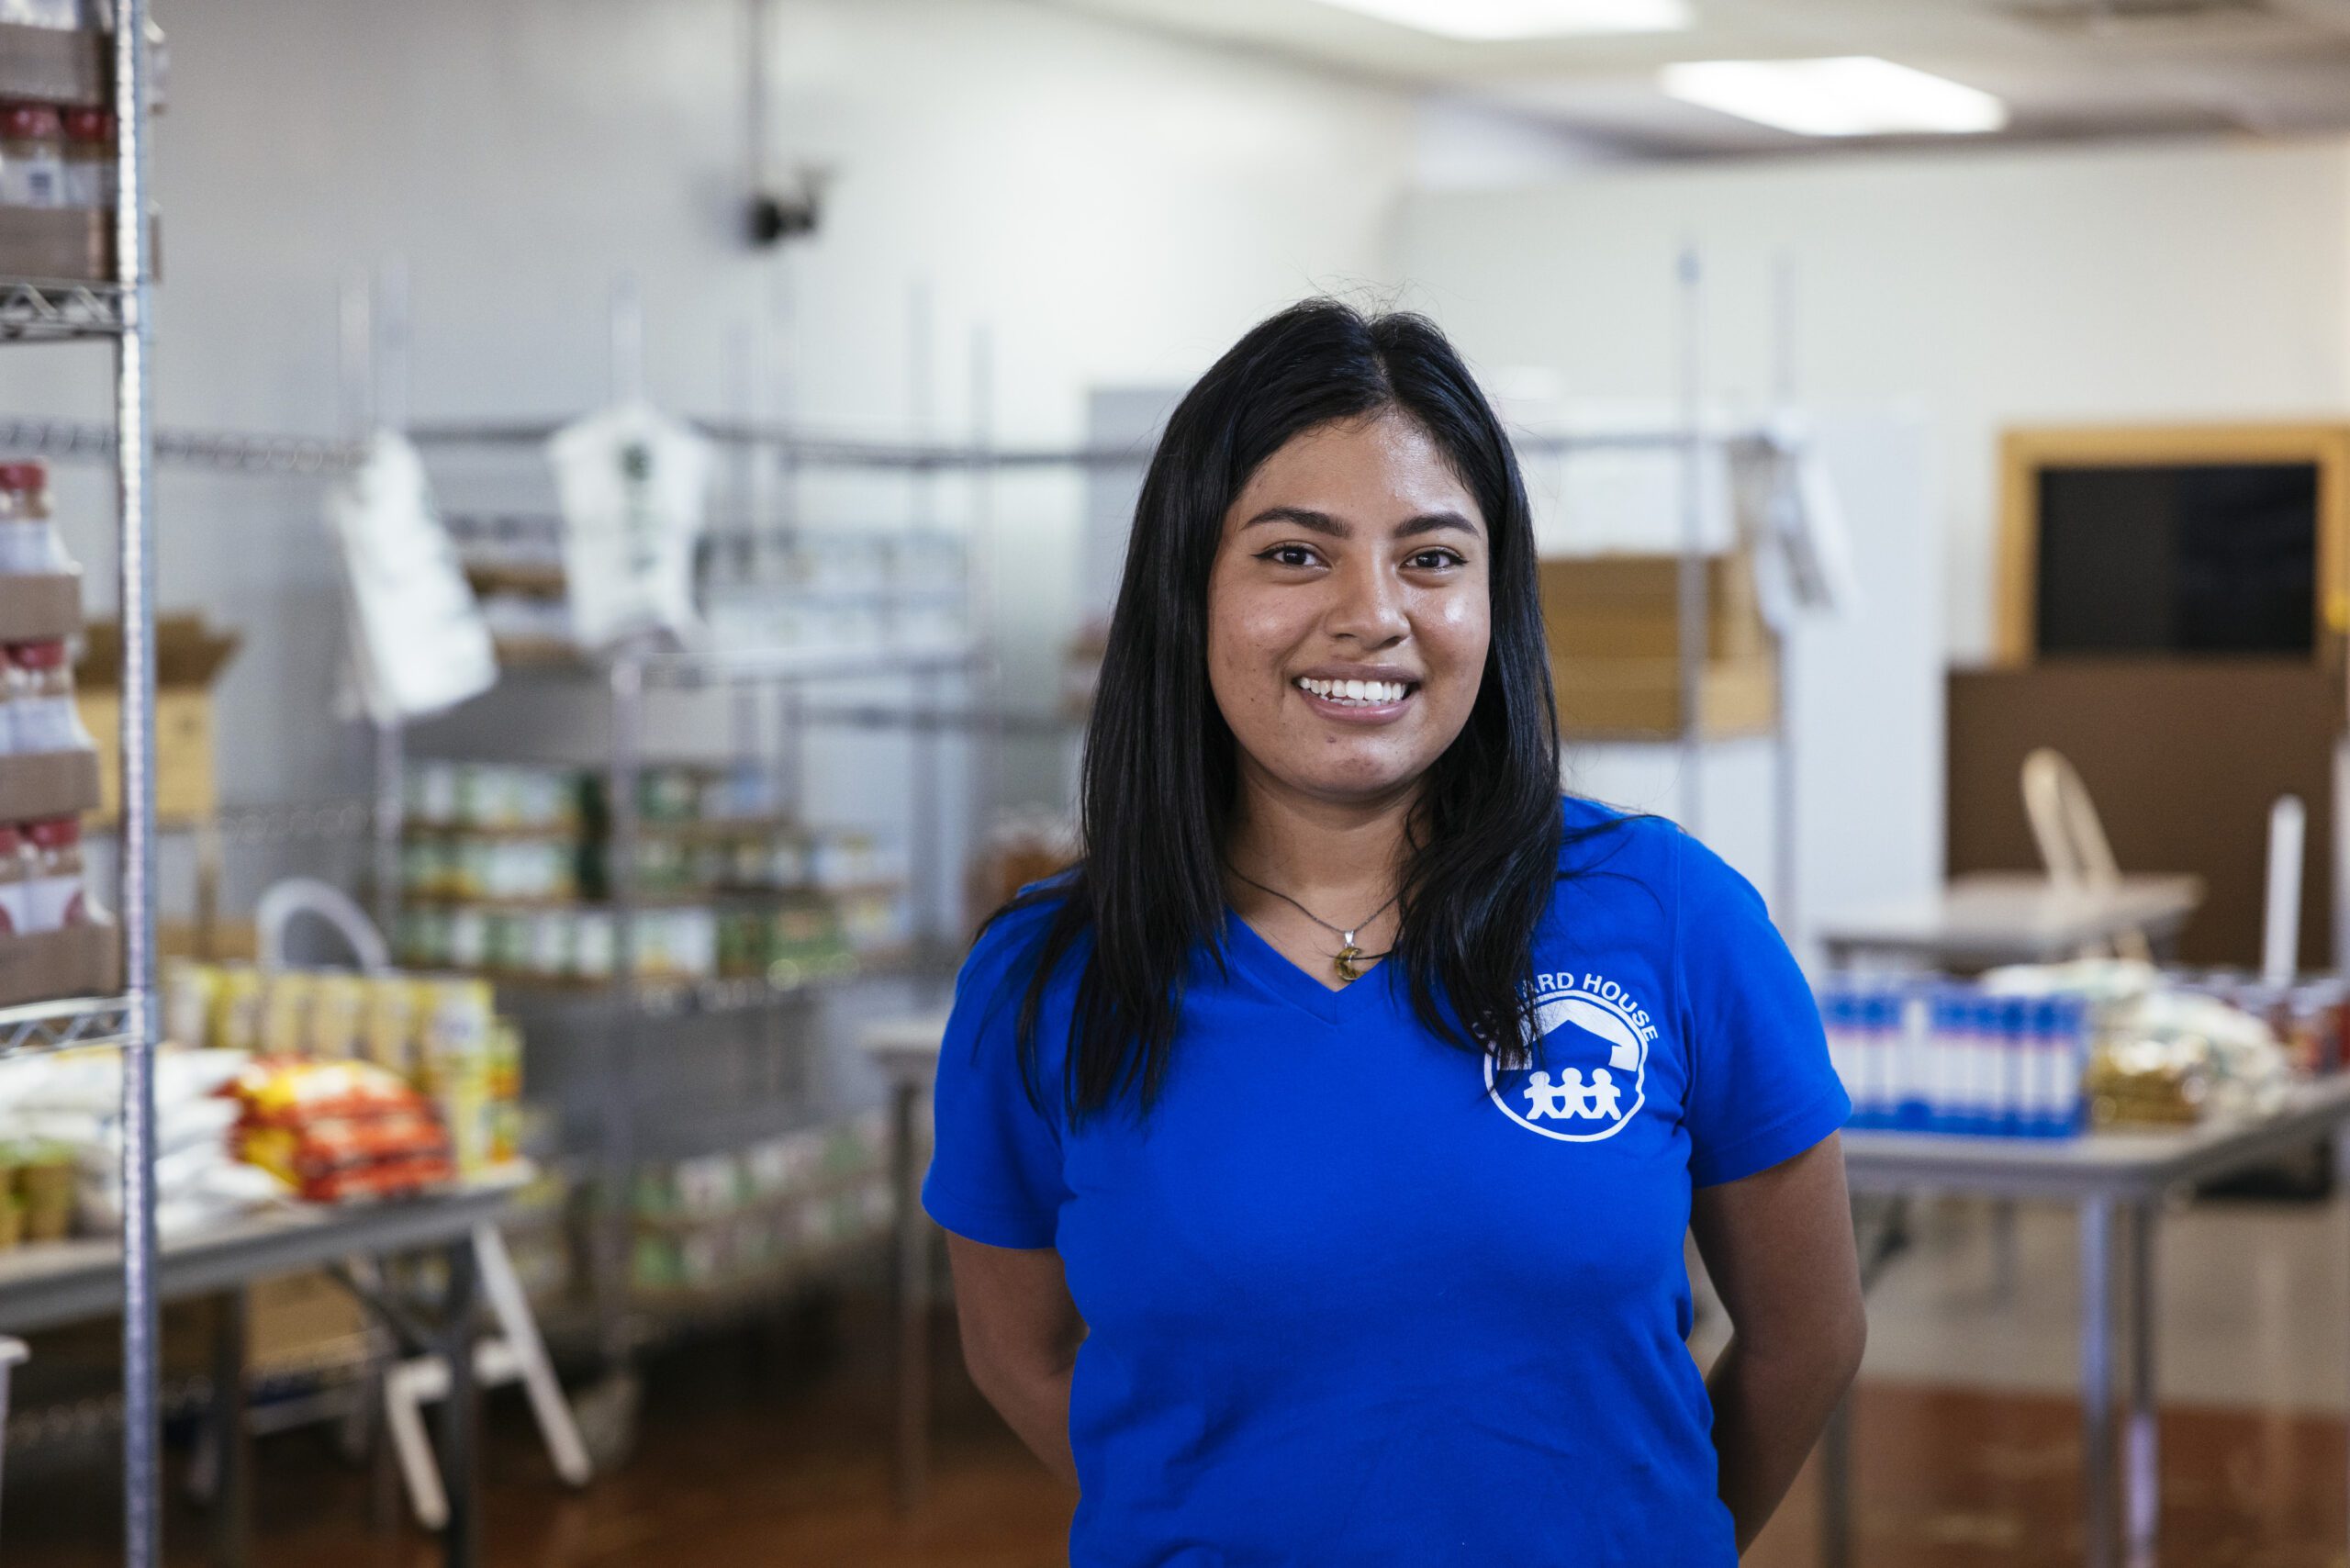 A food pantry staff member smiles at the camera